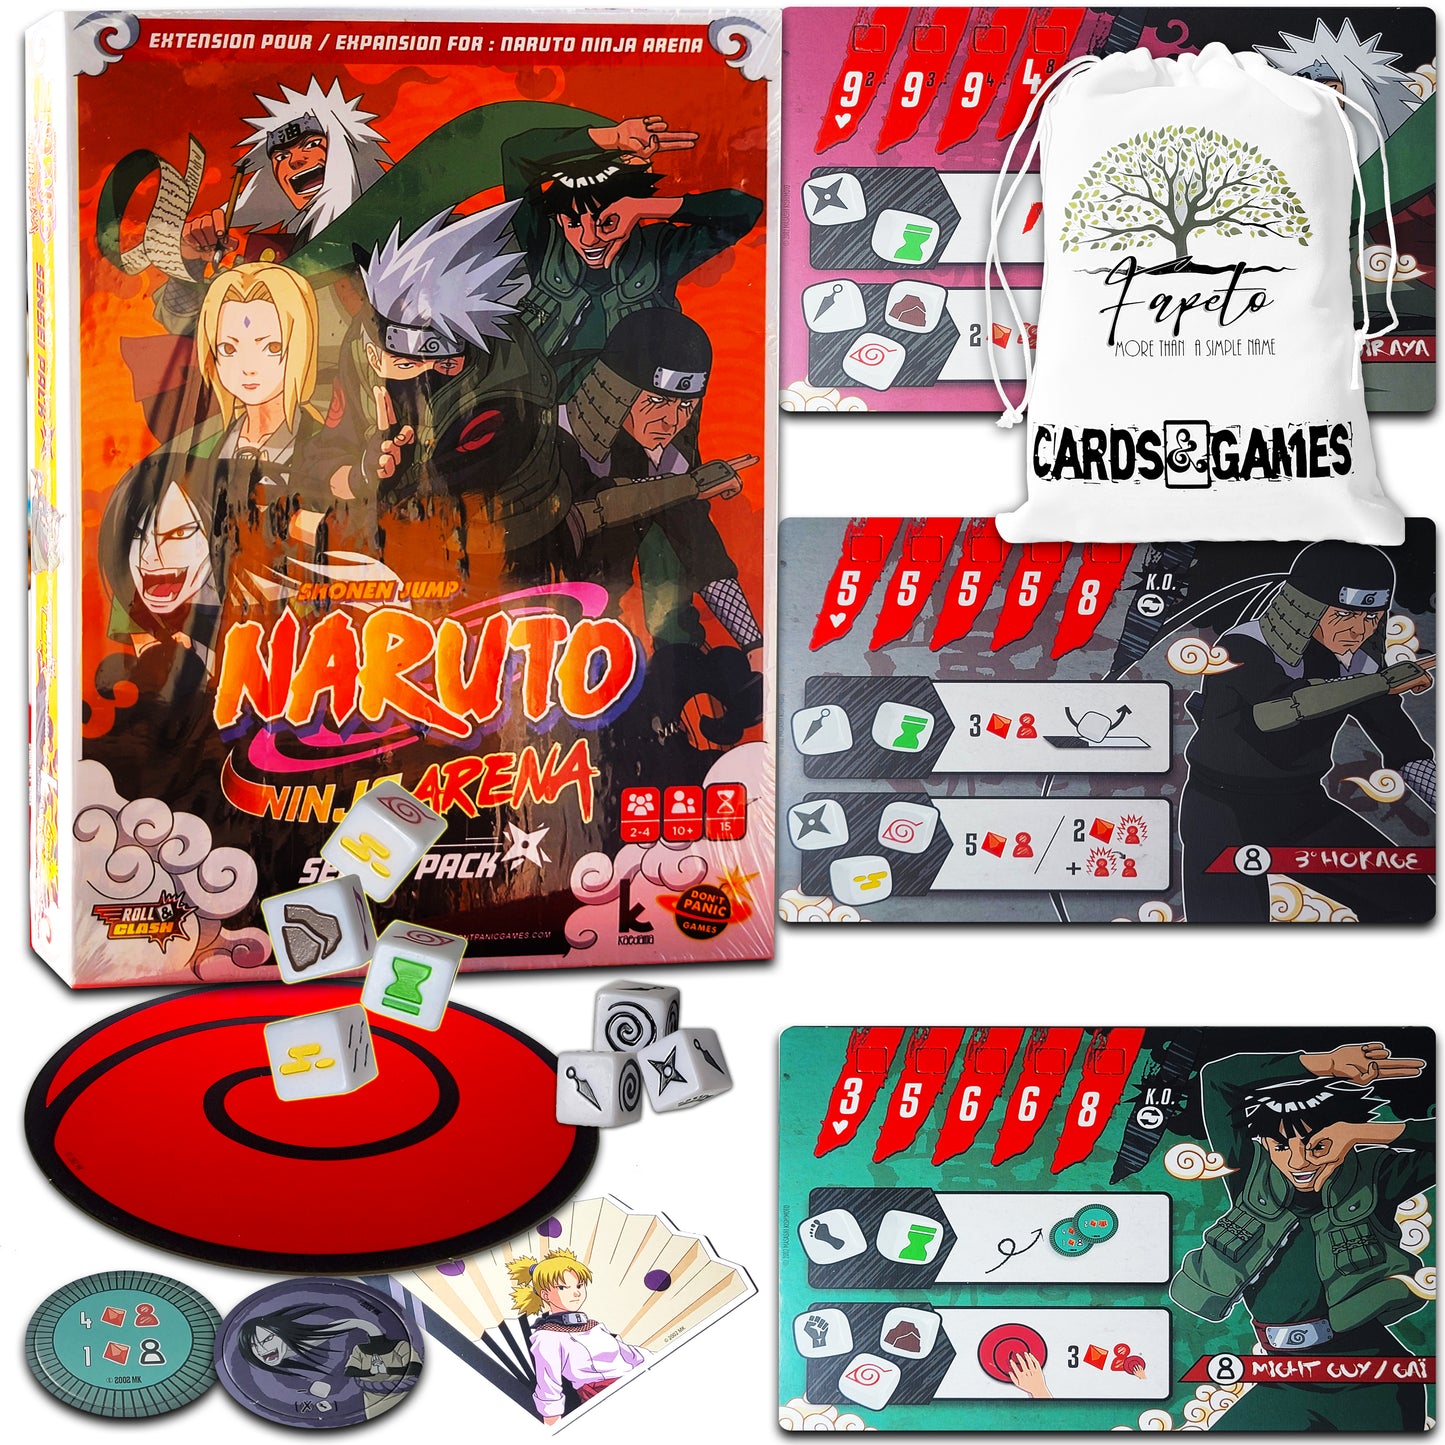 Dice Roll Game NARUTO NINJA ARENA (Core/Base) and The EXPANSIONS: Genin and Sensei Pack's Bundle With Random Color Drawstring Bag